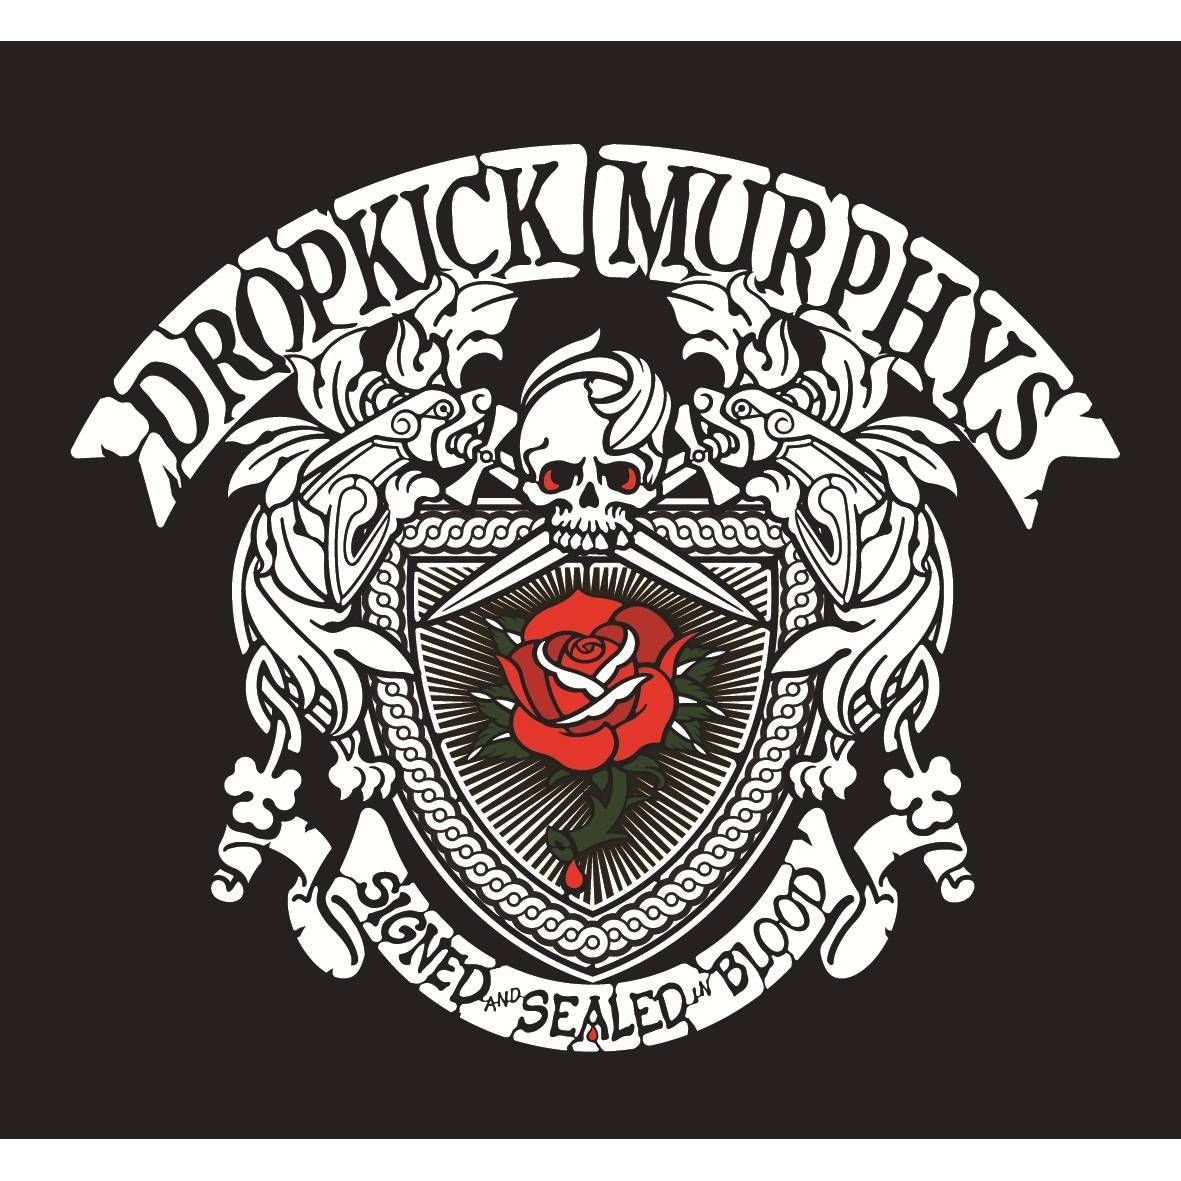 Dropkick Murphys Signed And Sealed In Blood Cover - HD Wallpaper 